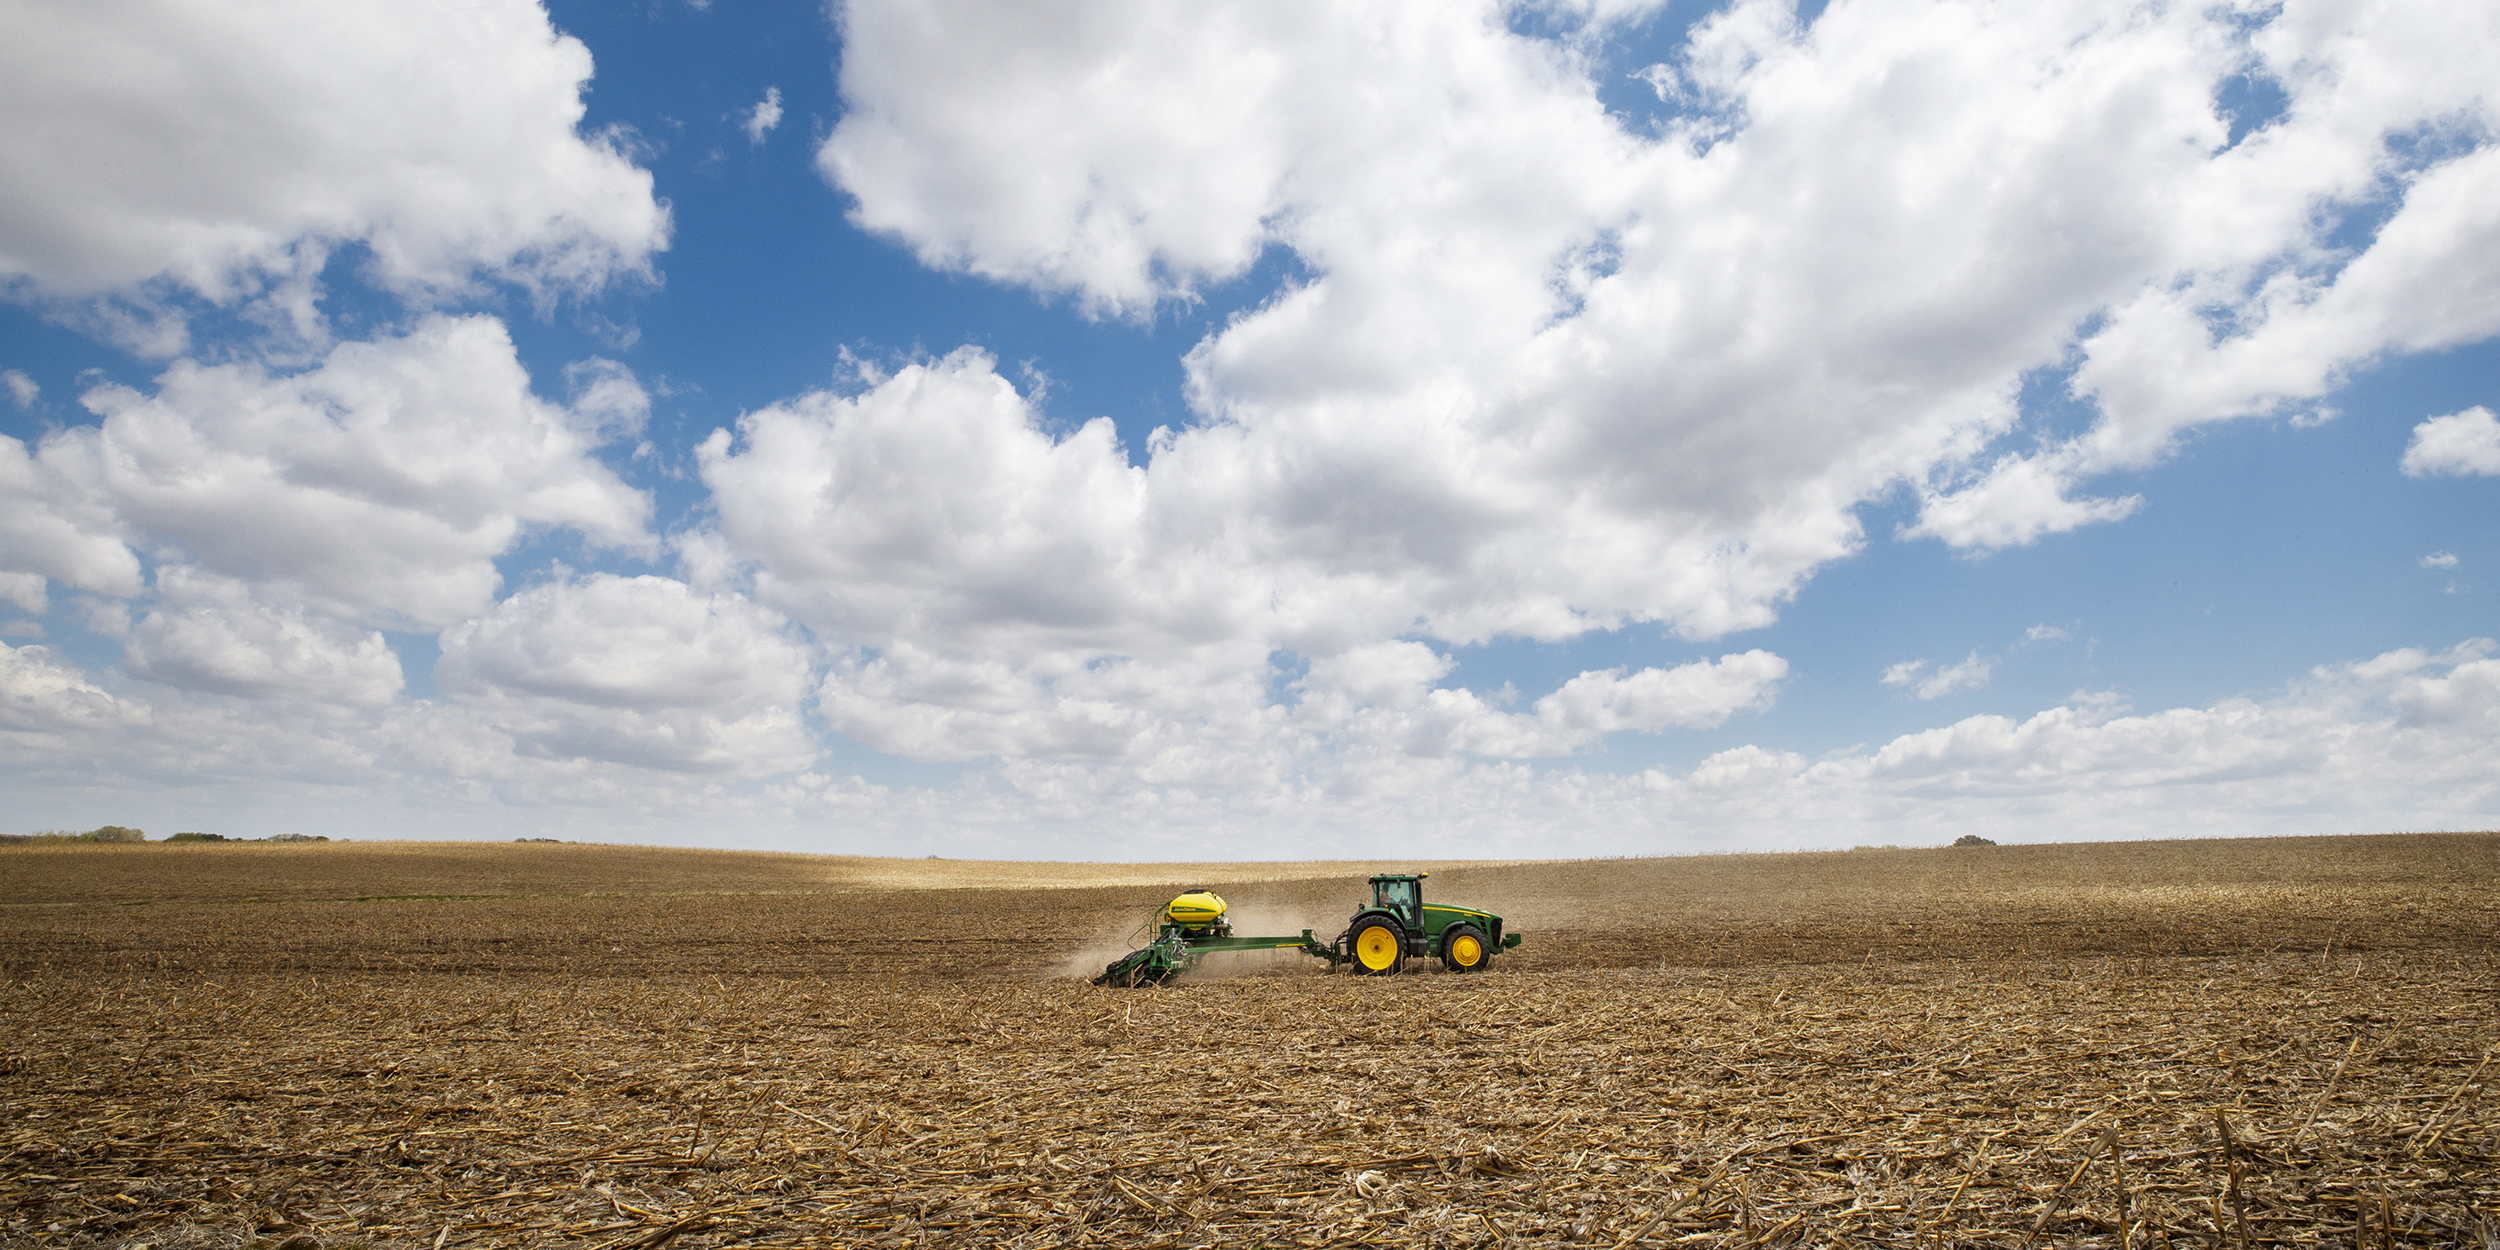 Carbon sequestration practices, such as no-till farming, can allow producers to create carbon credits and enter into contracts with aggregators who purchase the credits to offset the emissions of organizations they represent.